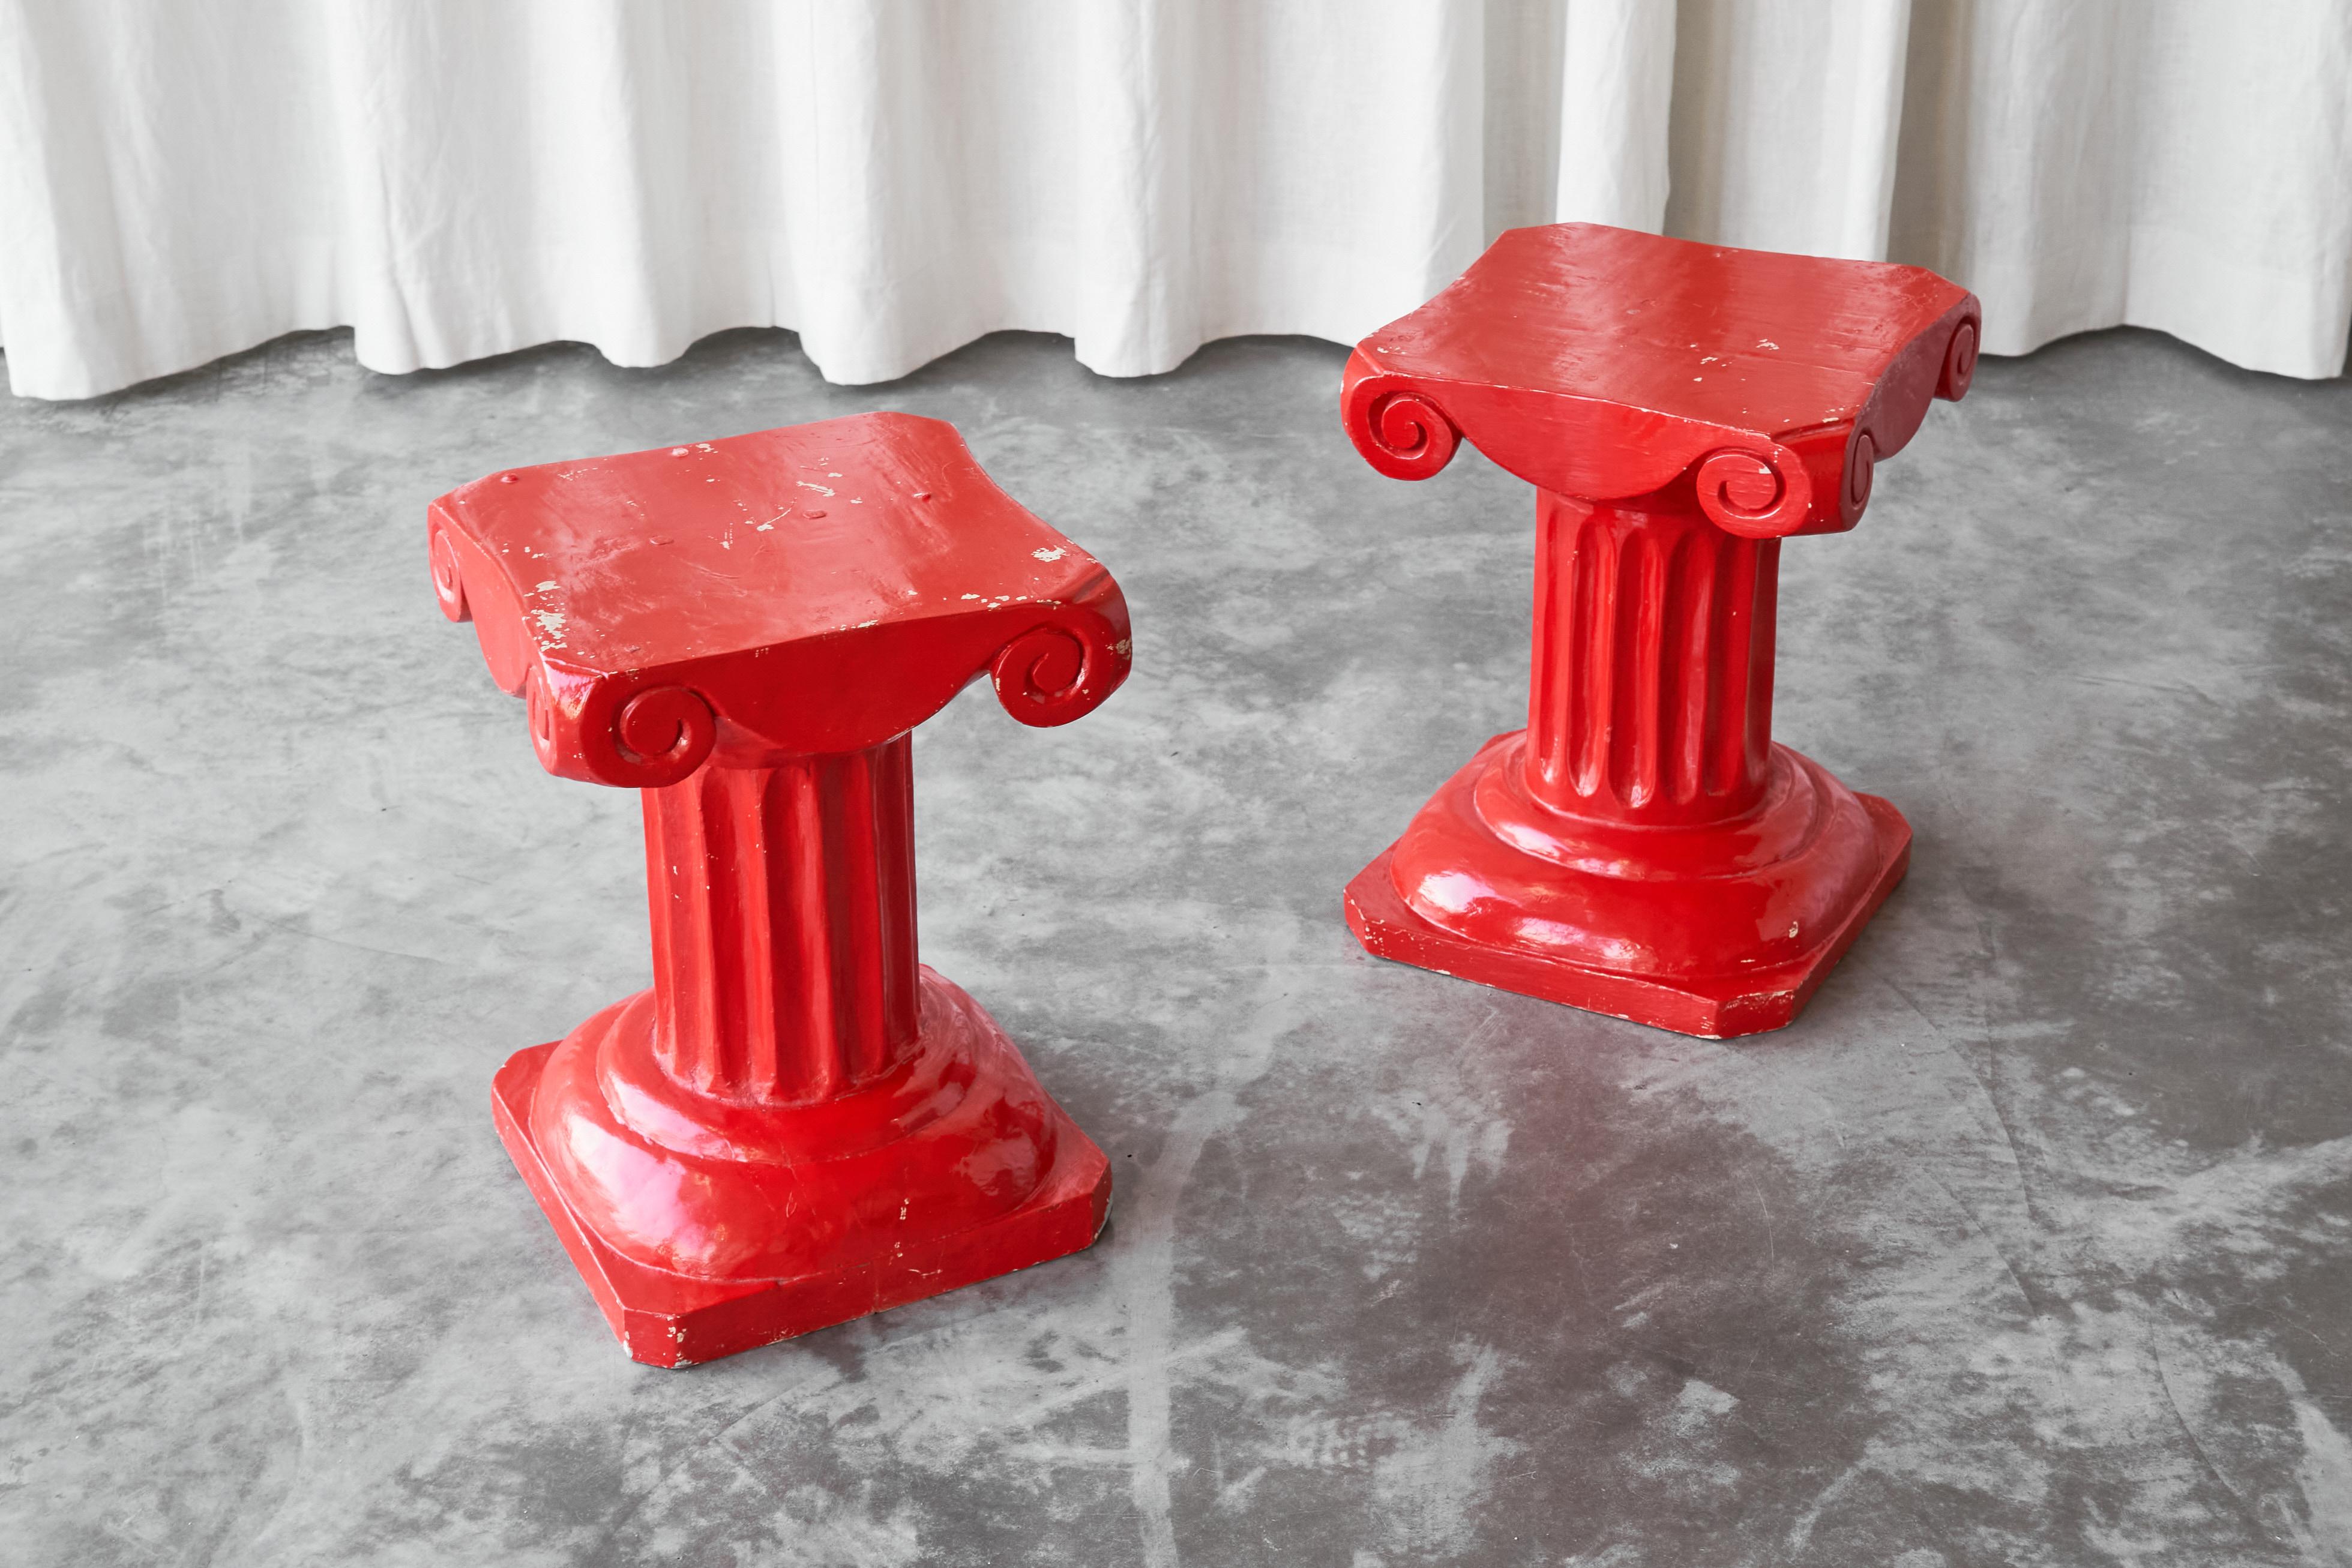 This is a fun pair of hand carved column stools or side tables in solid wood, made by an artisan craftsman in the middle of the 20th century.

Quirky and one-off, these red lacquered column shaped stools or side tables are no doubt a colorful